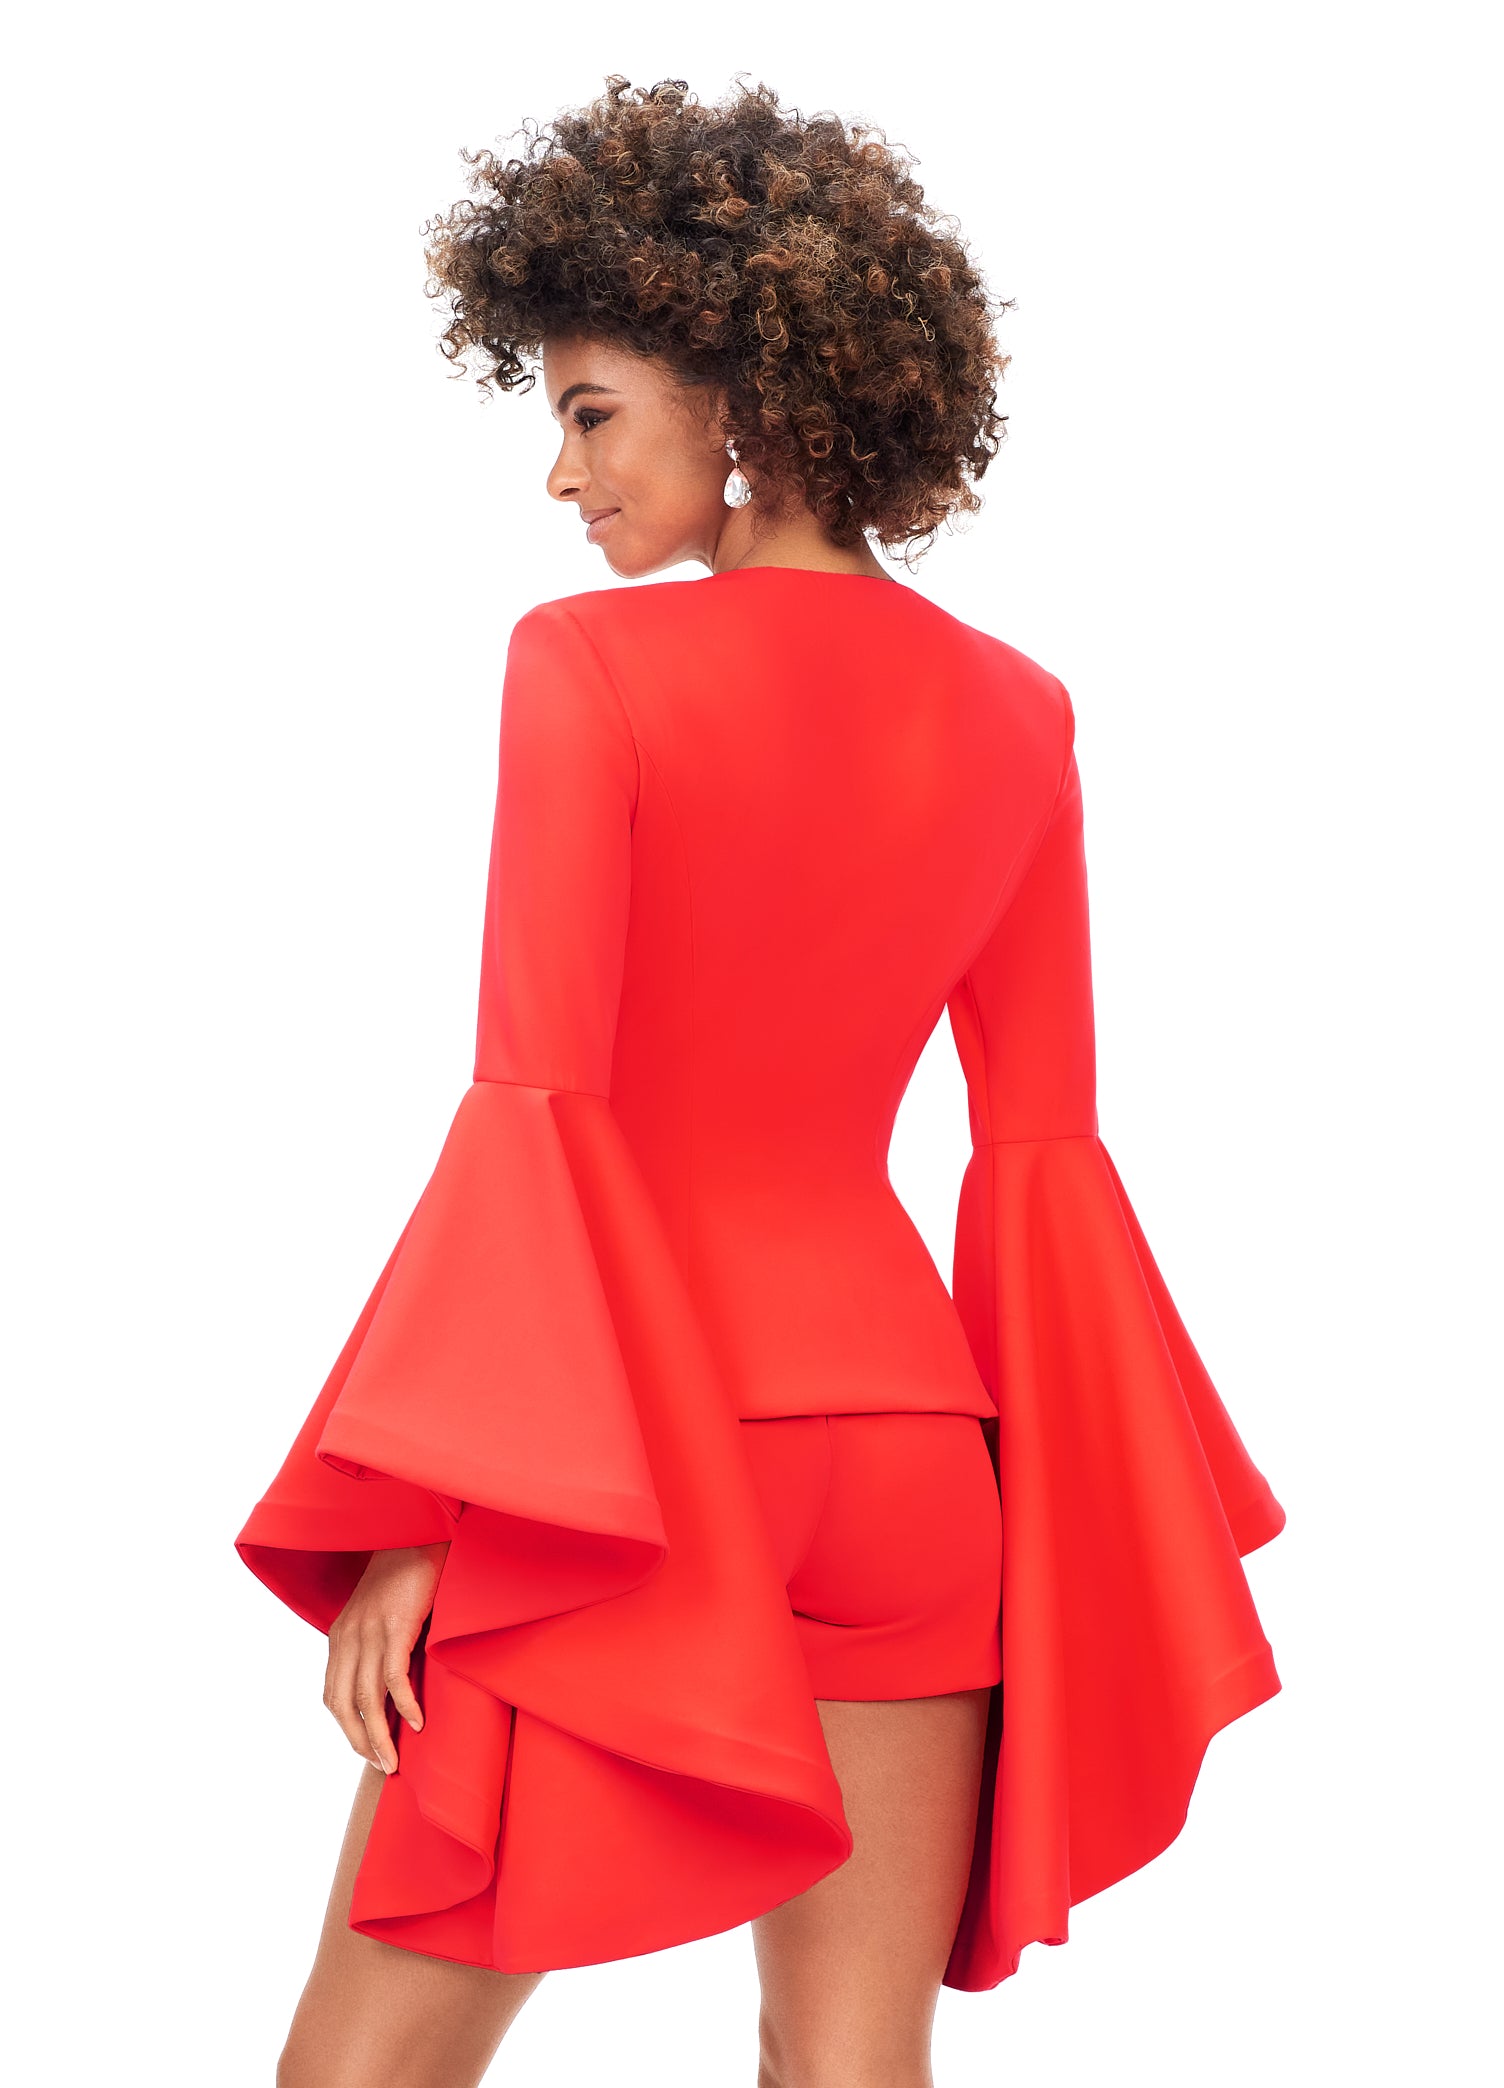 Ashley Lauren 4572 Make a statement in this fabulous two piece romper. The top features a deep v-neckline and dramatic bell sleeves. V-Neckline Bell Sleeves Two-Piece Romper COLORS: Fuchsia, Green, Neon Orange